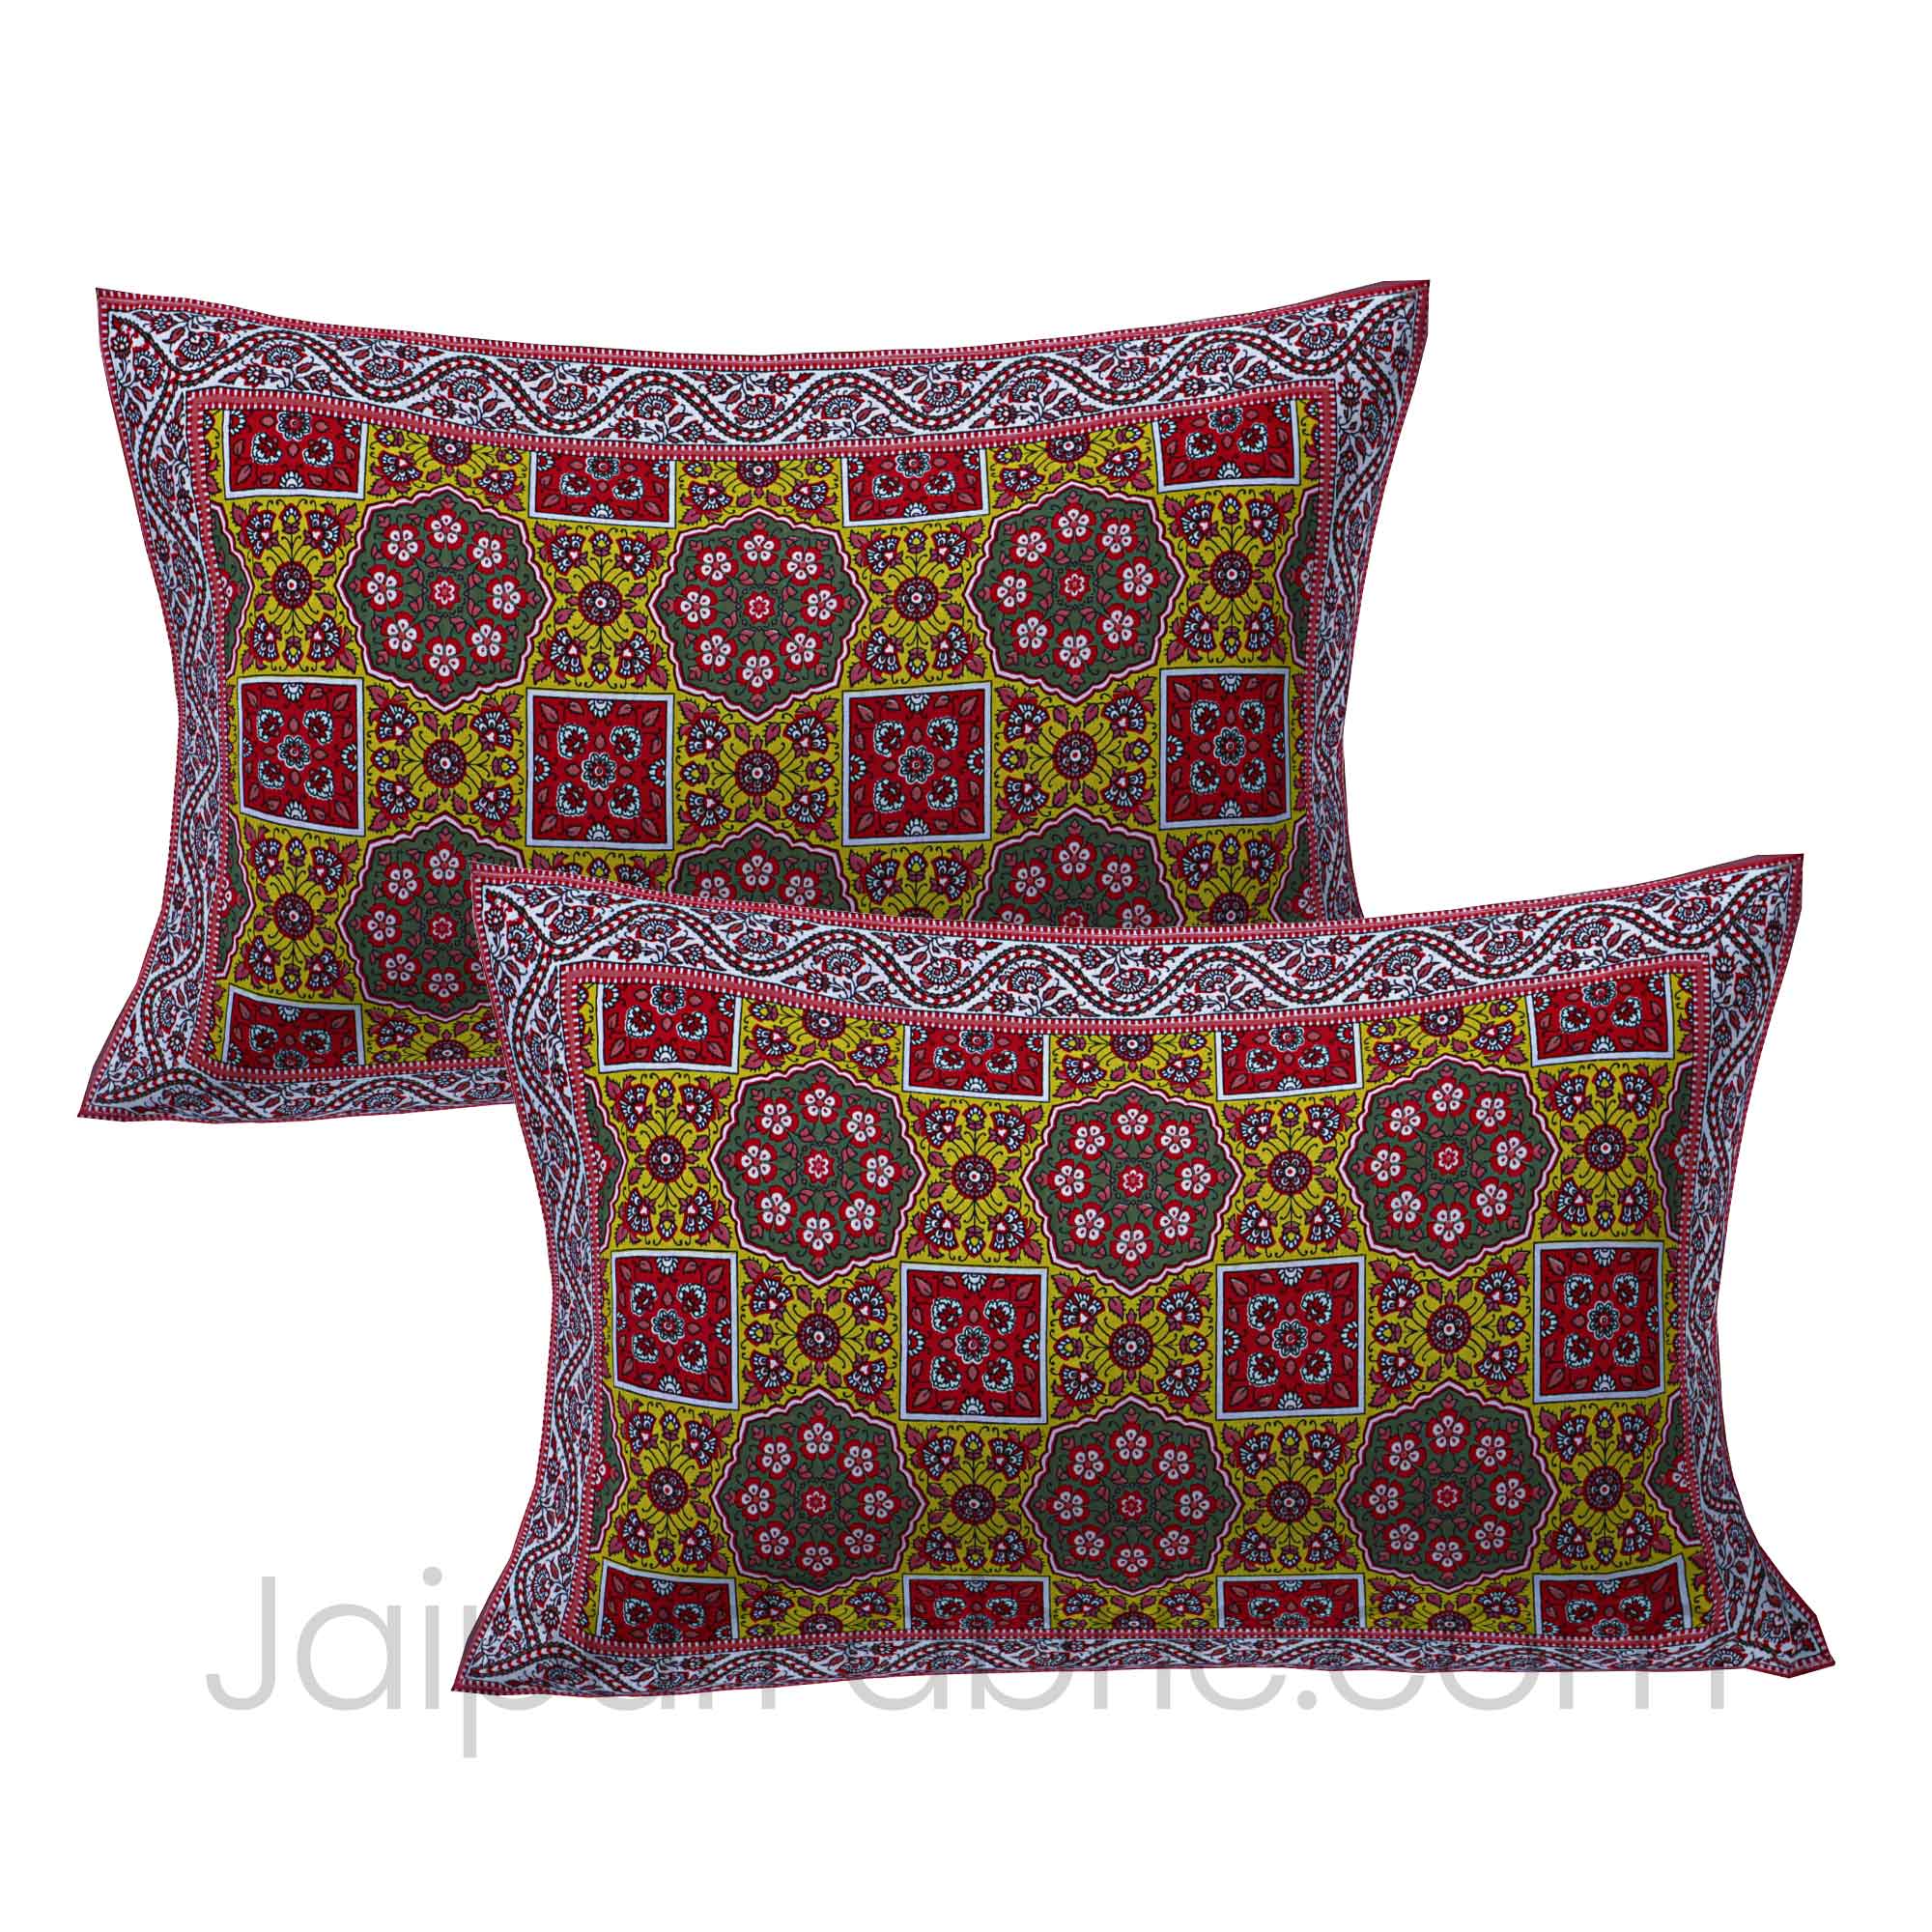 Red Yellow Sparkling Motif Double Bedsheet